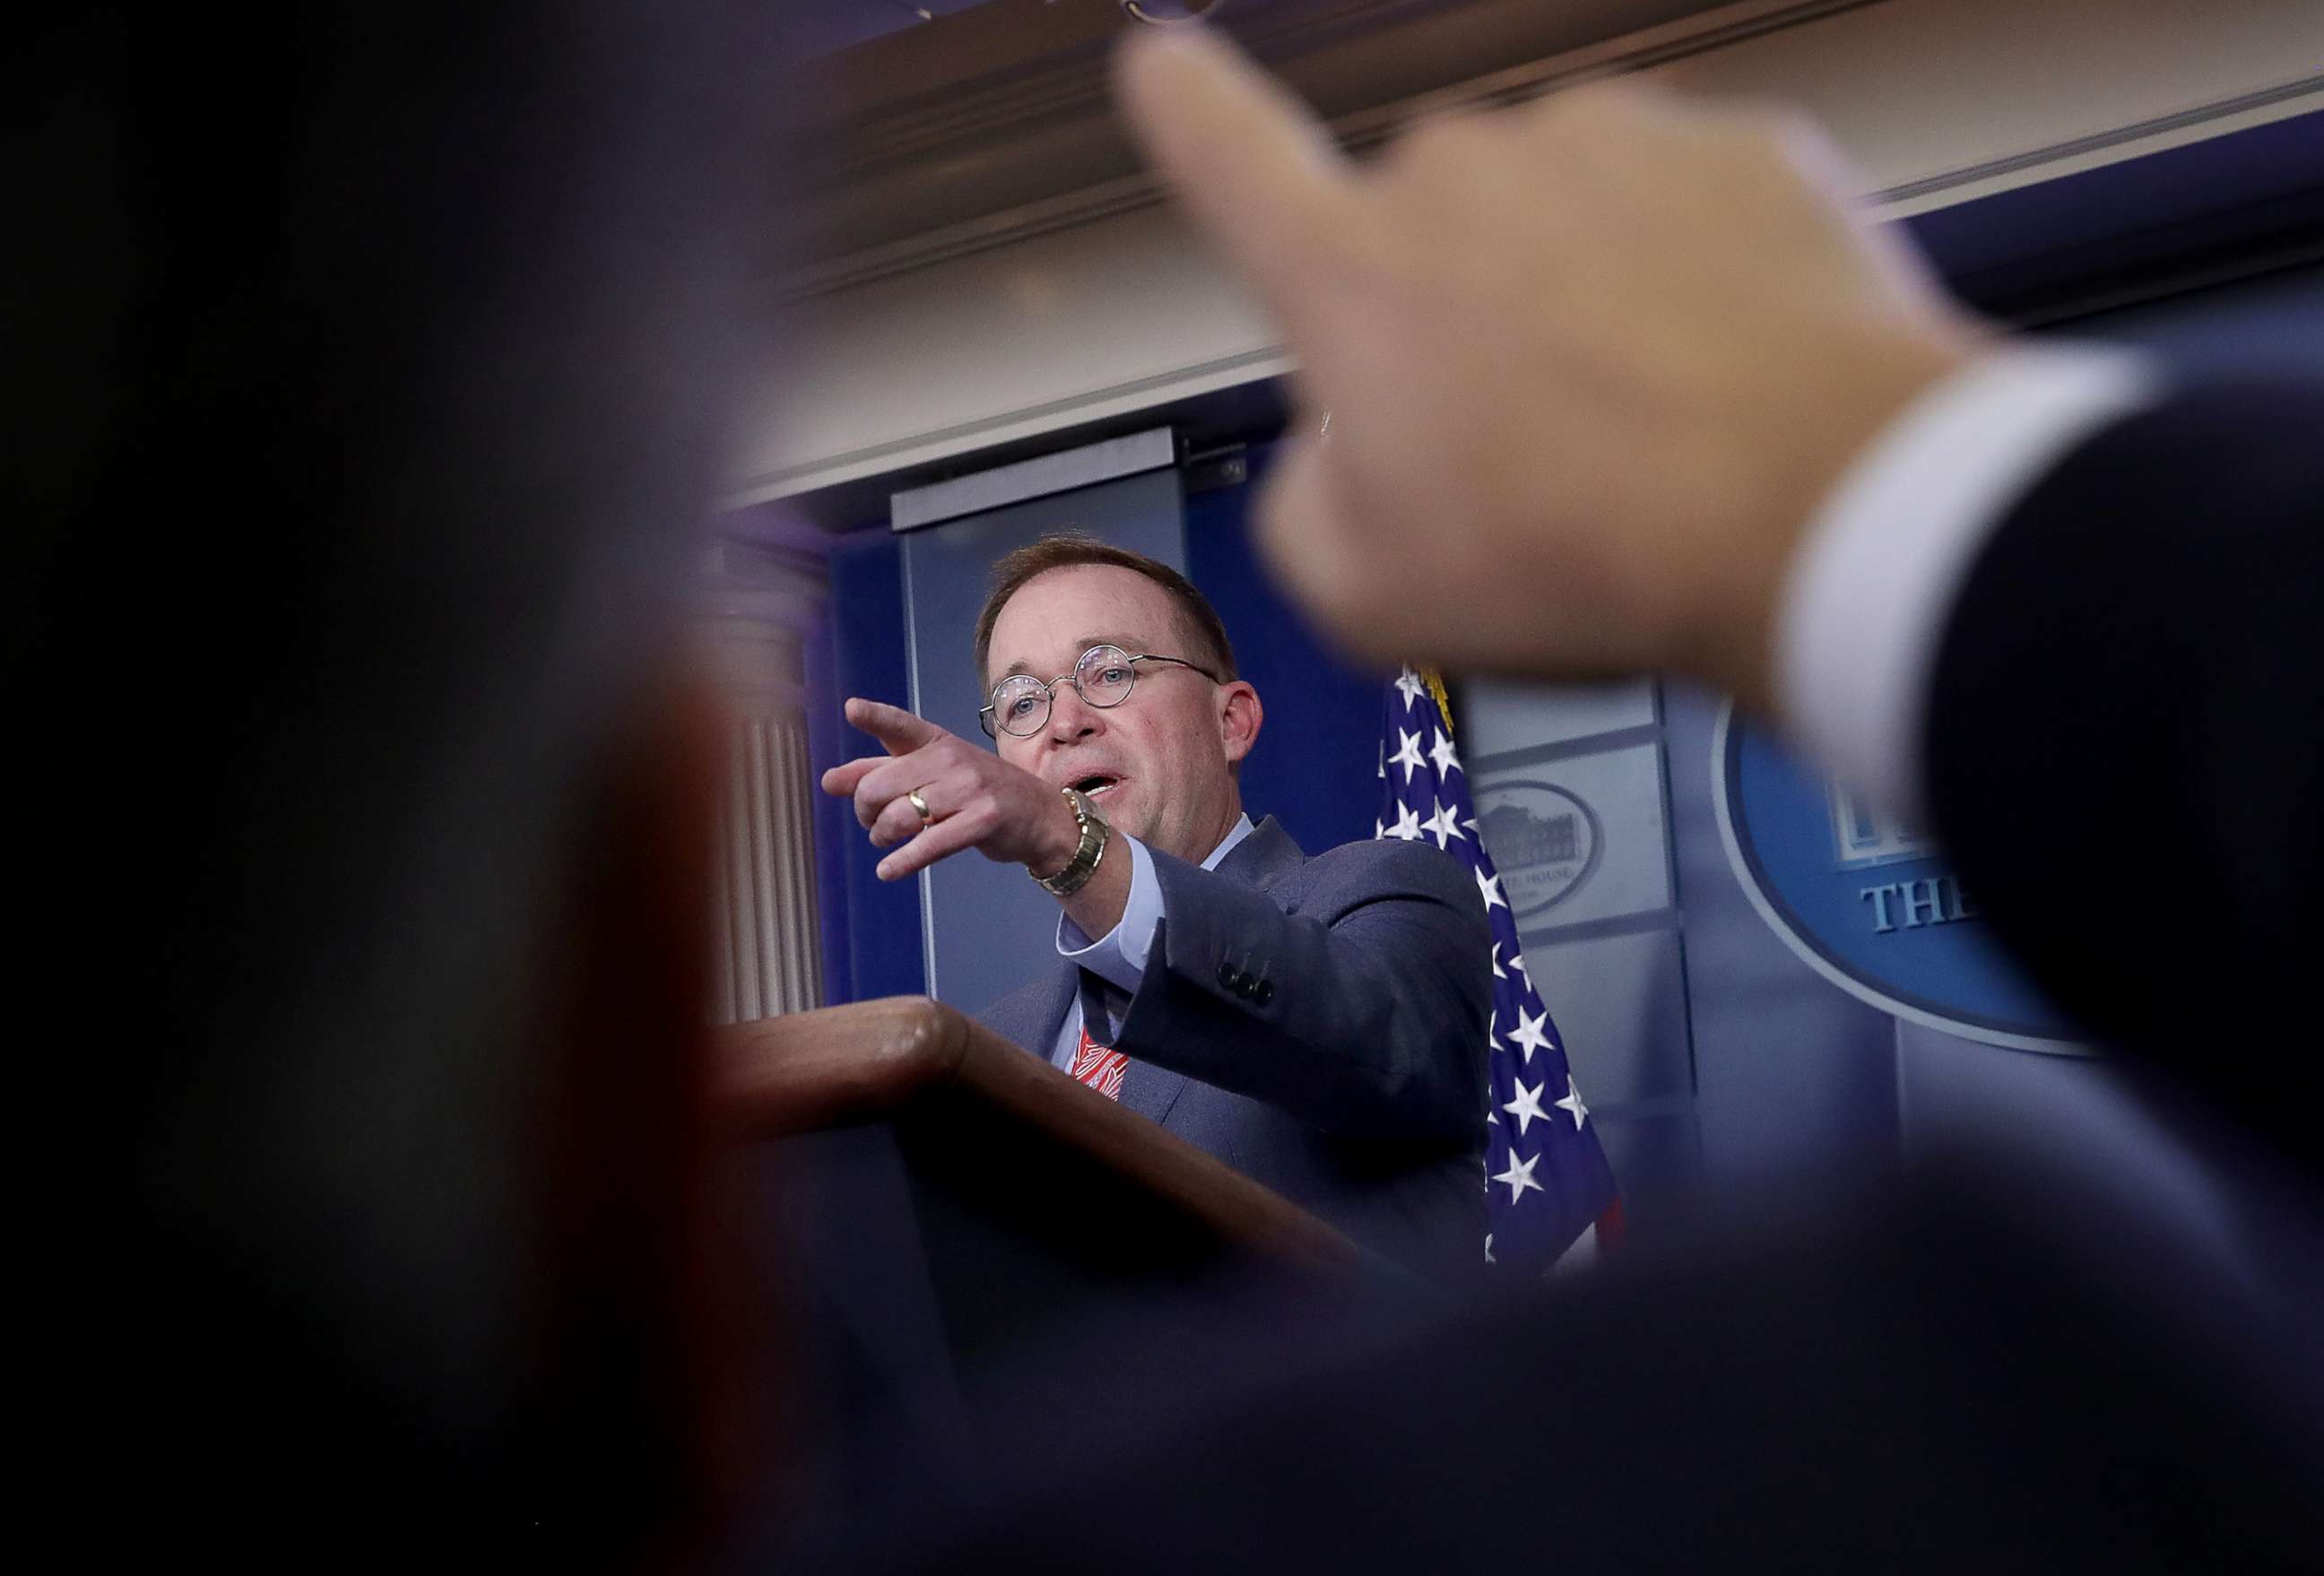 PHOTO: Acting White House Chief of Staff Mick Mulvaney answers questions during a briefing at the White House on Oct. 17, 2019 in Washington, D.C.